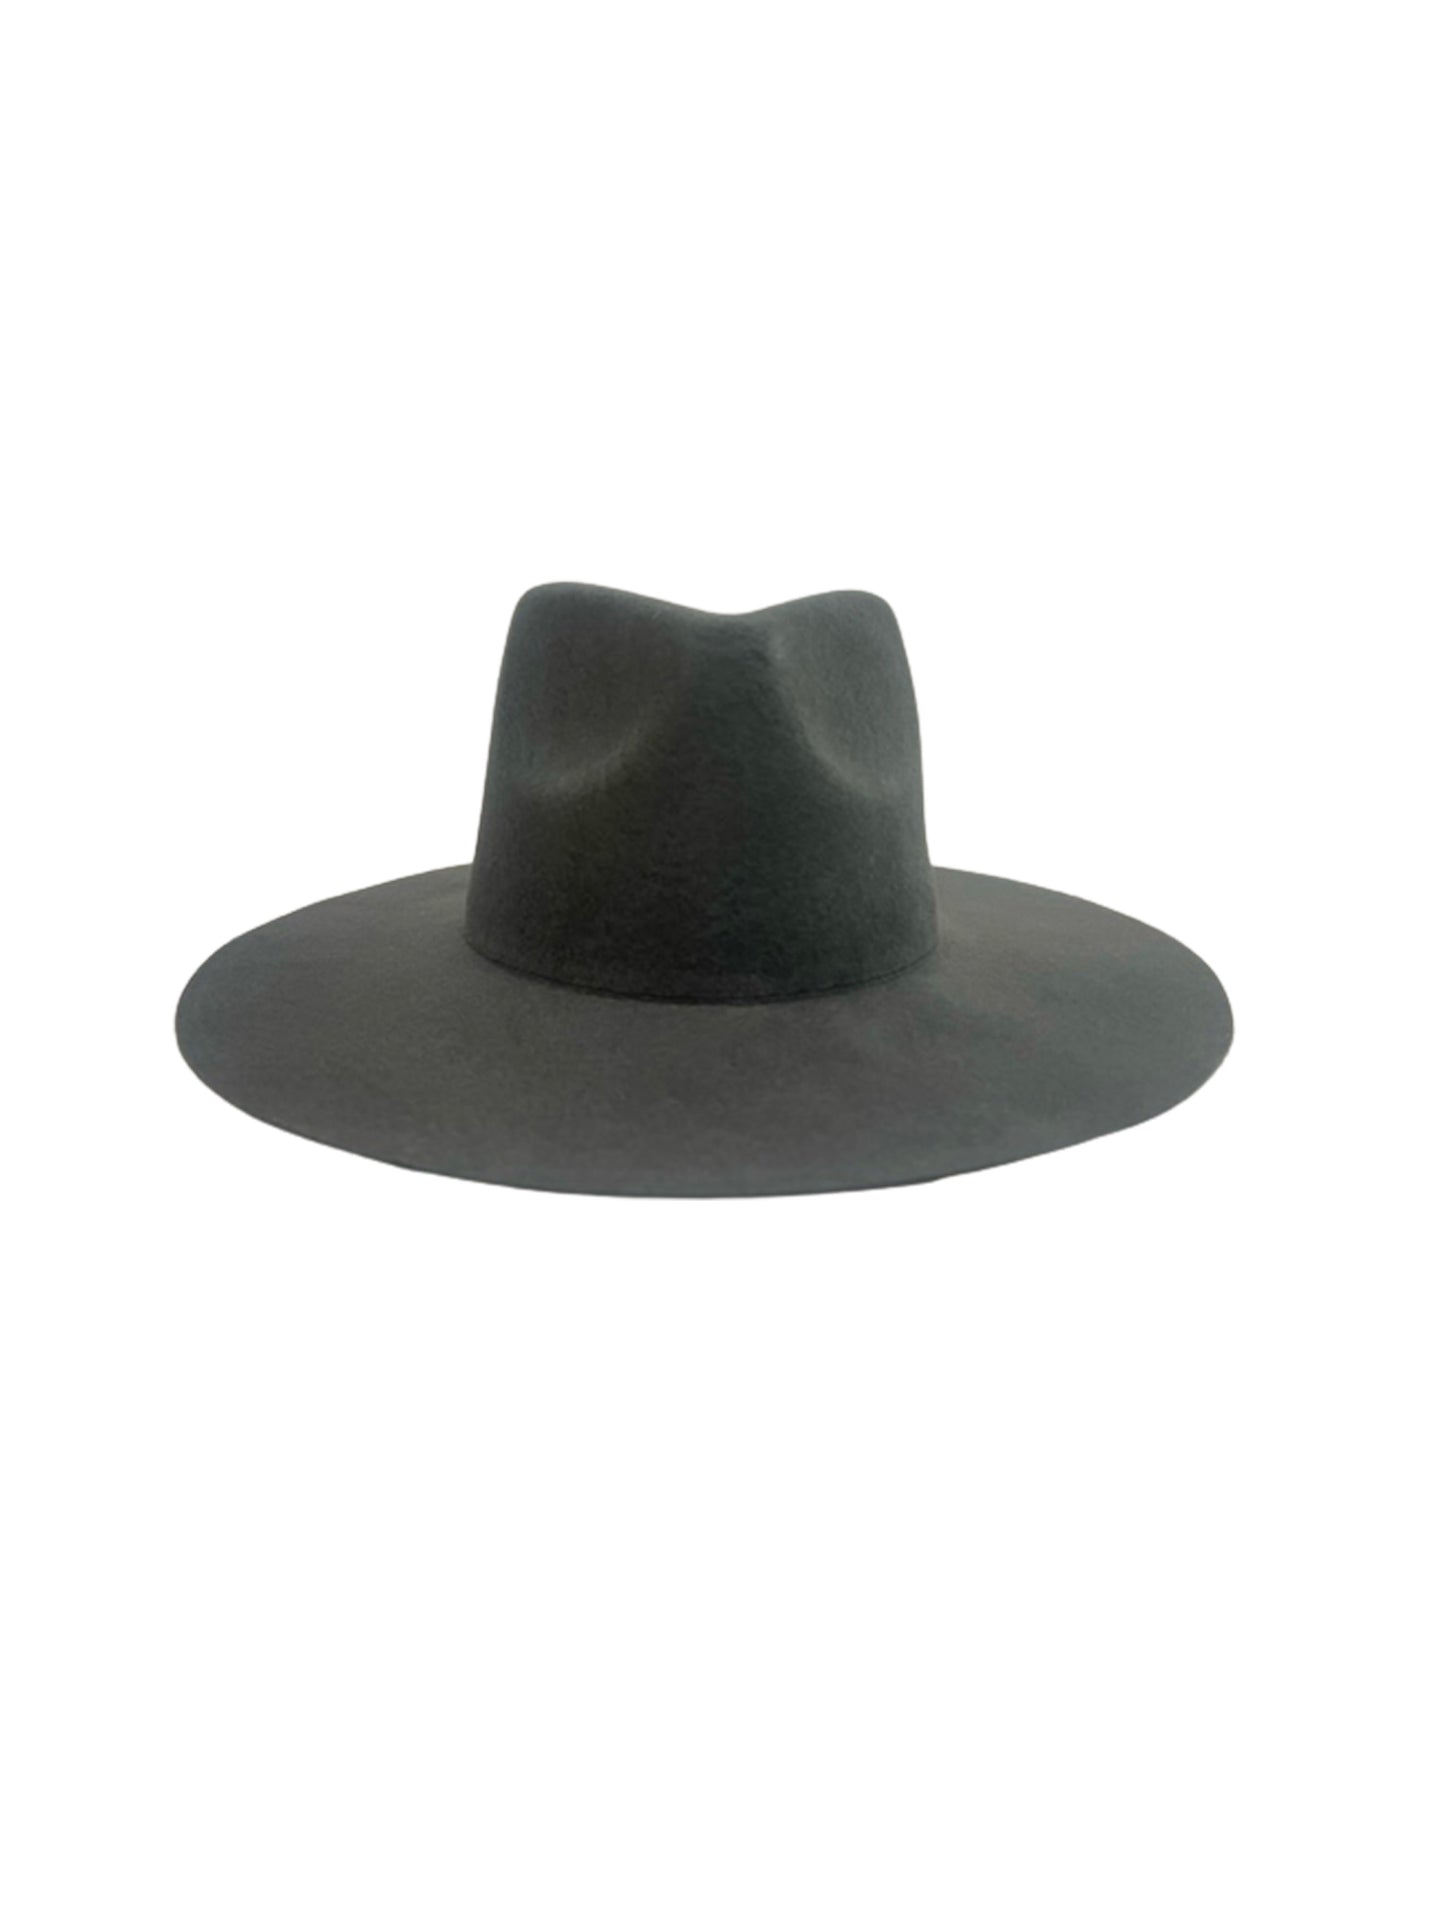 rancher hat charcoal front